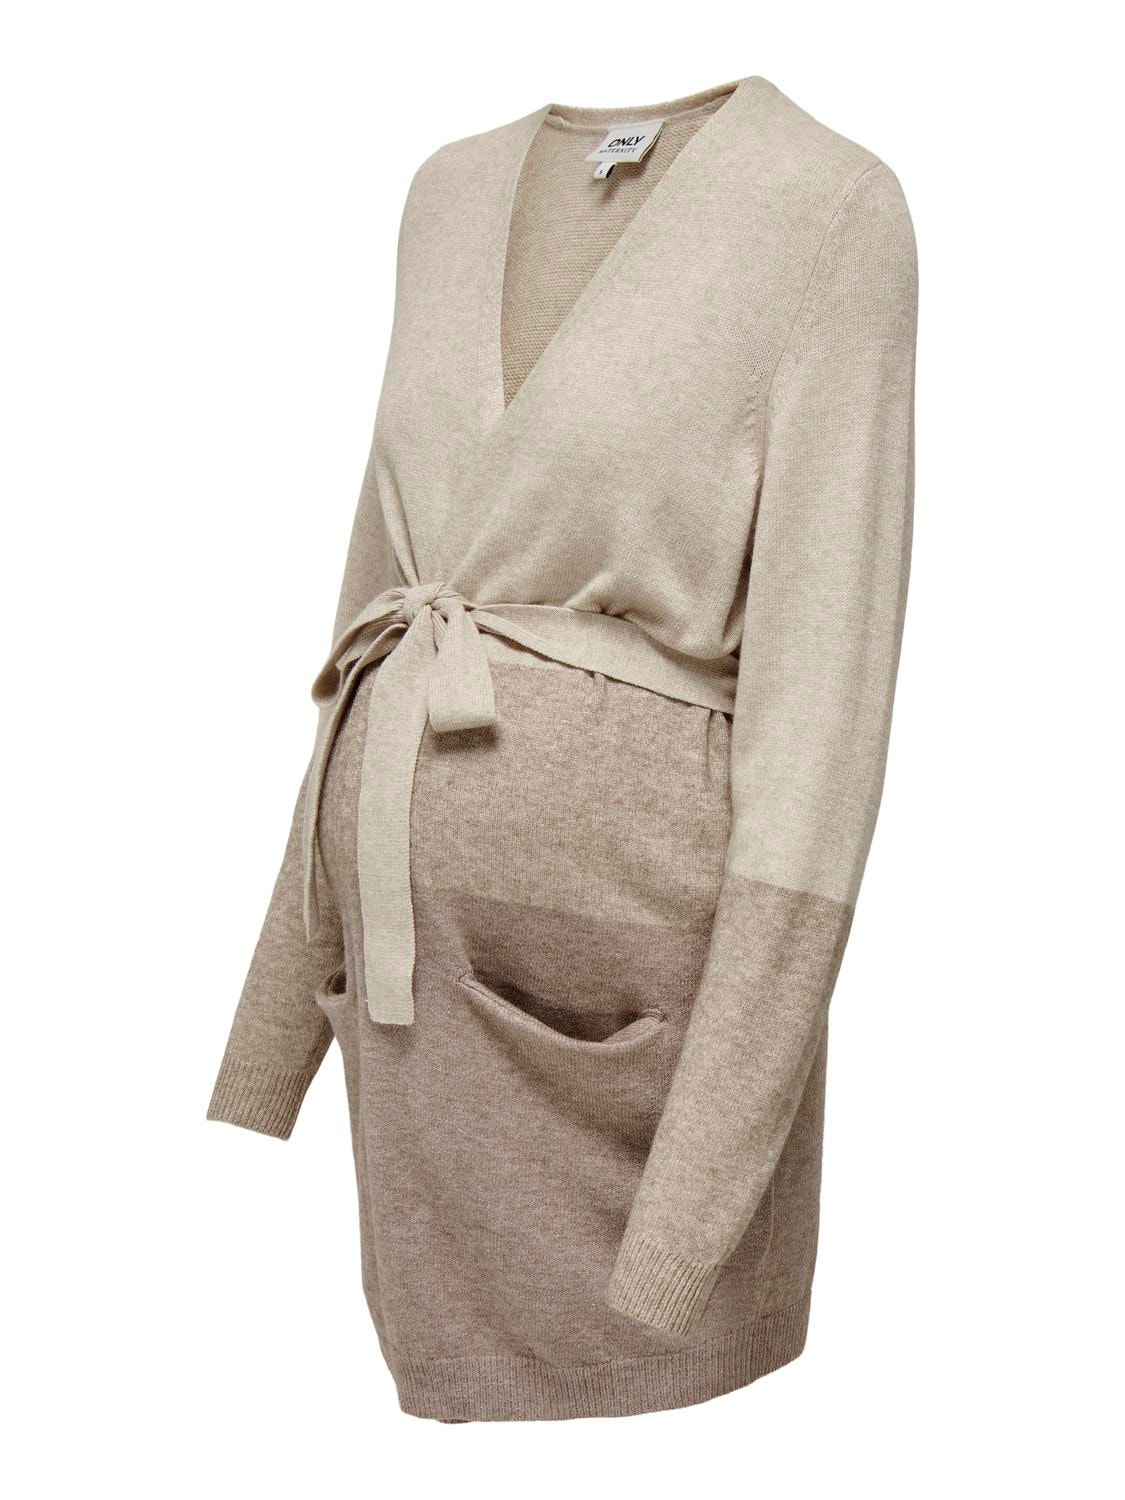 ONLY Mama Long Belt Knitted Cardigan -Sand - 15277707